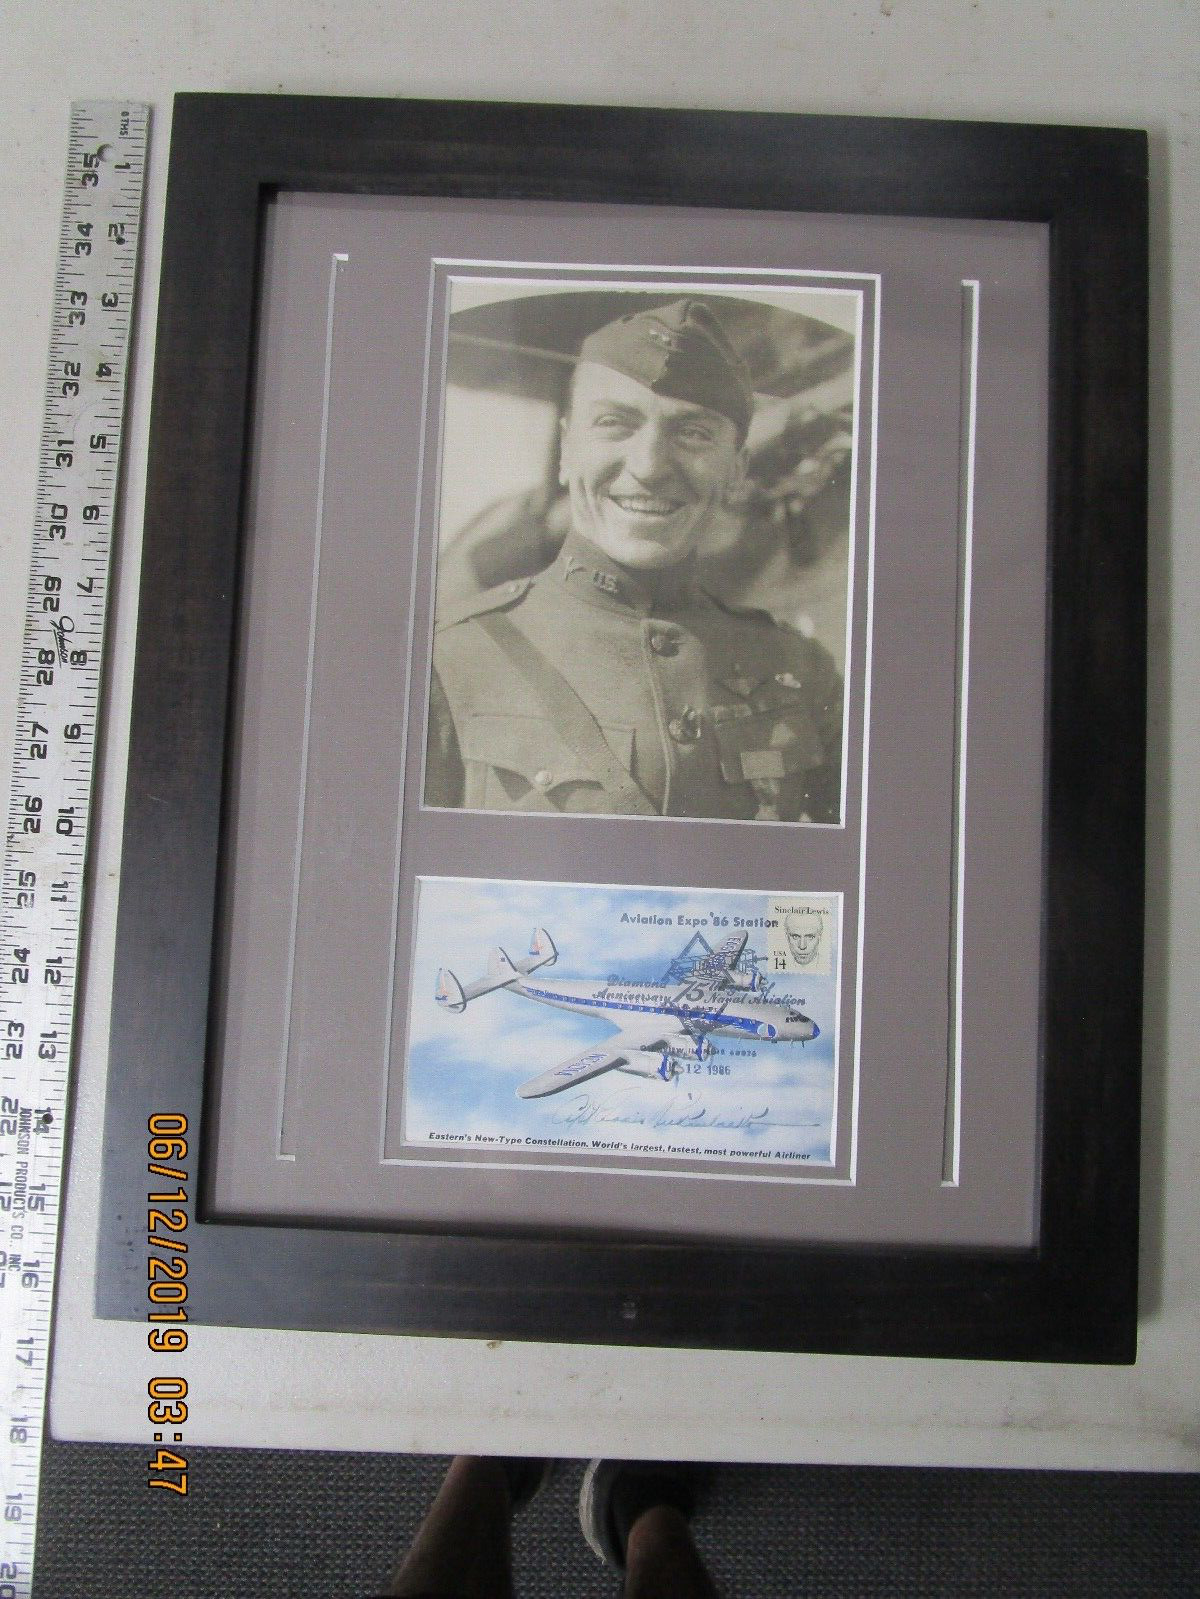 WWI FIGHTER ACE Eddie Rickenbacker Autograph Signed Card w Photo From 1942 File